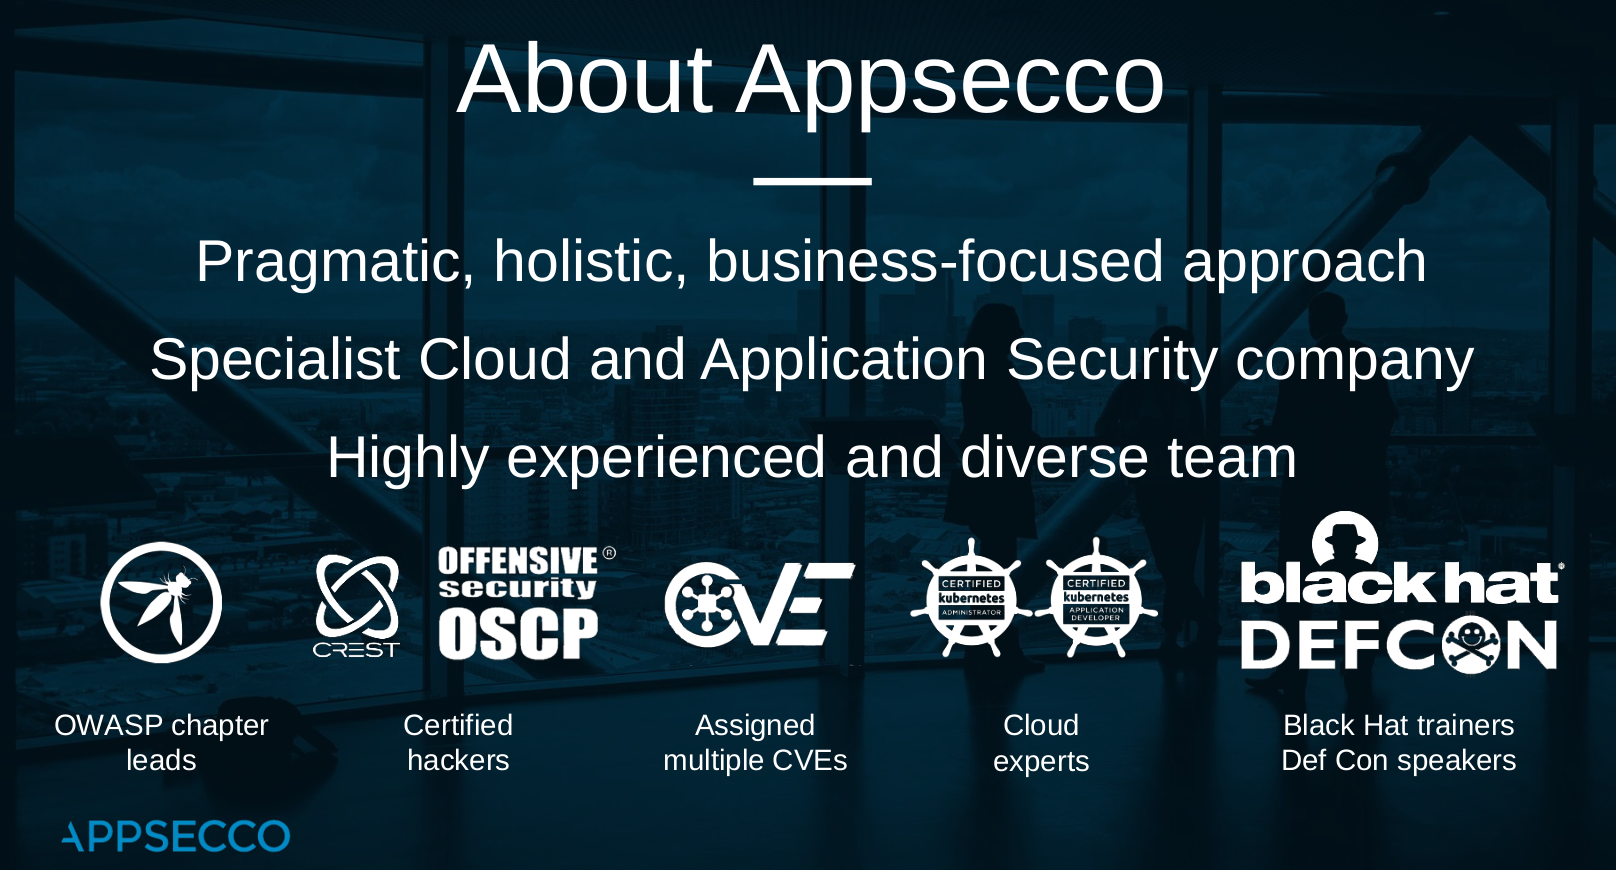 About Appsecco